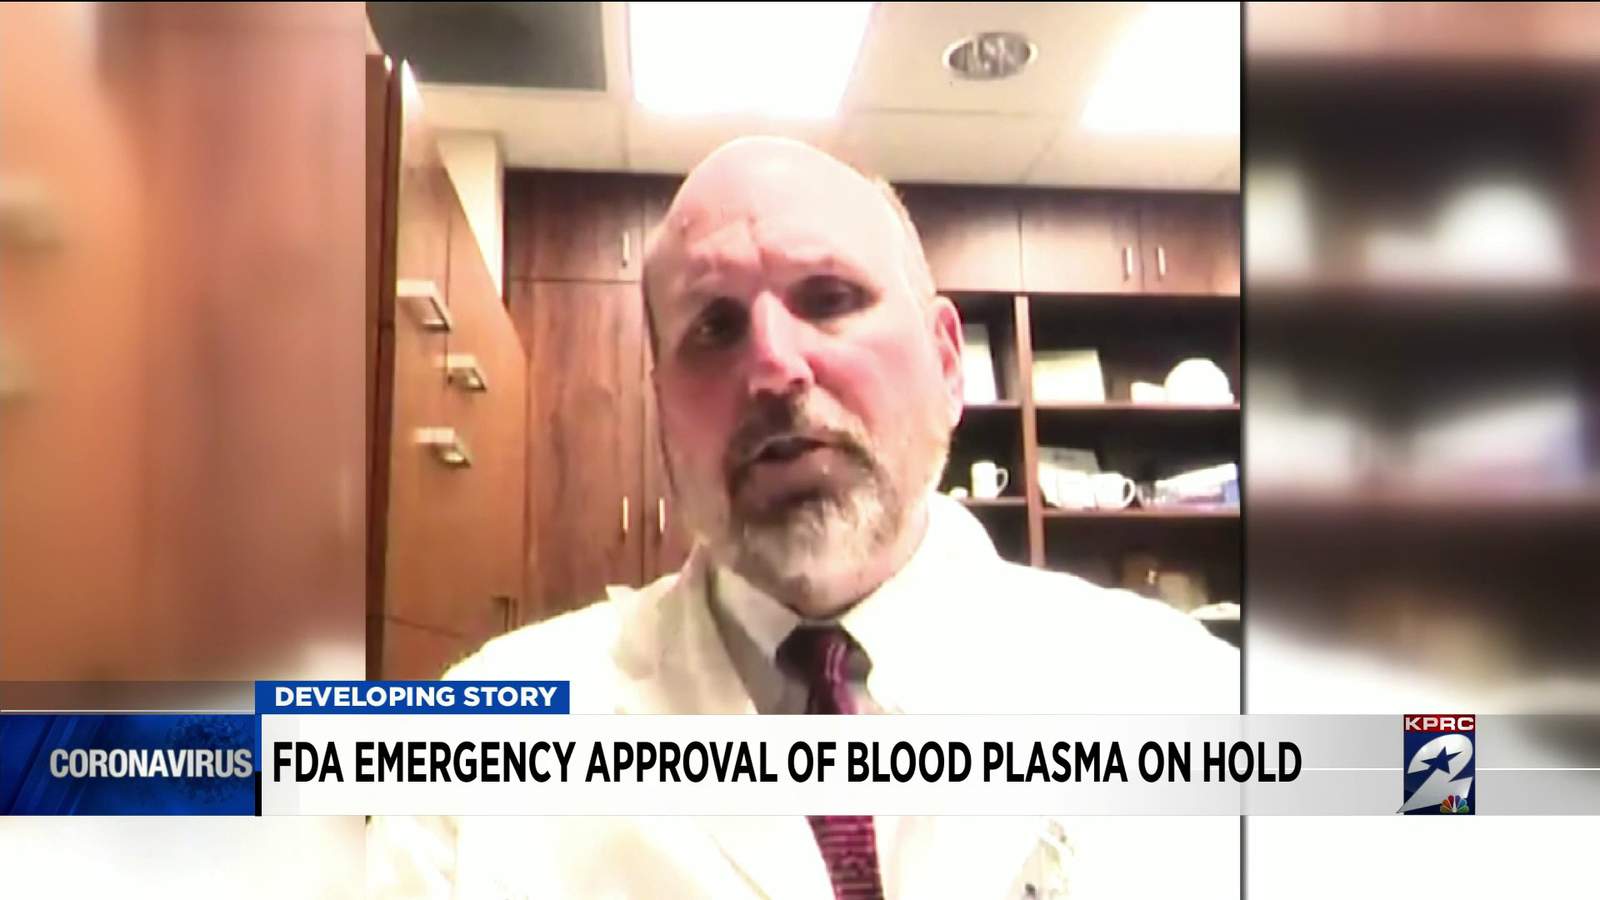 Doctors discuss blood plasma treatment for COVD-19 as FDA puts authorization on hold